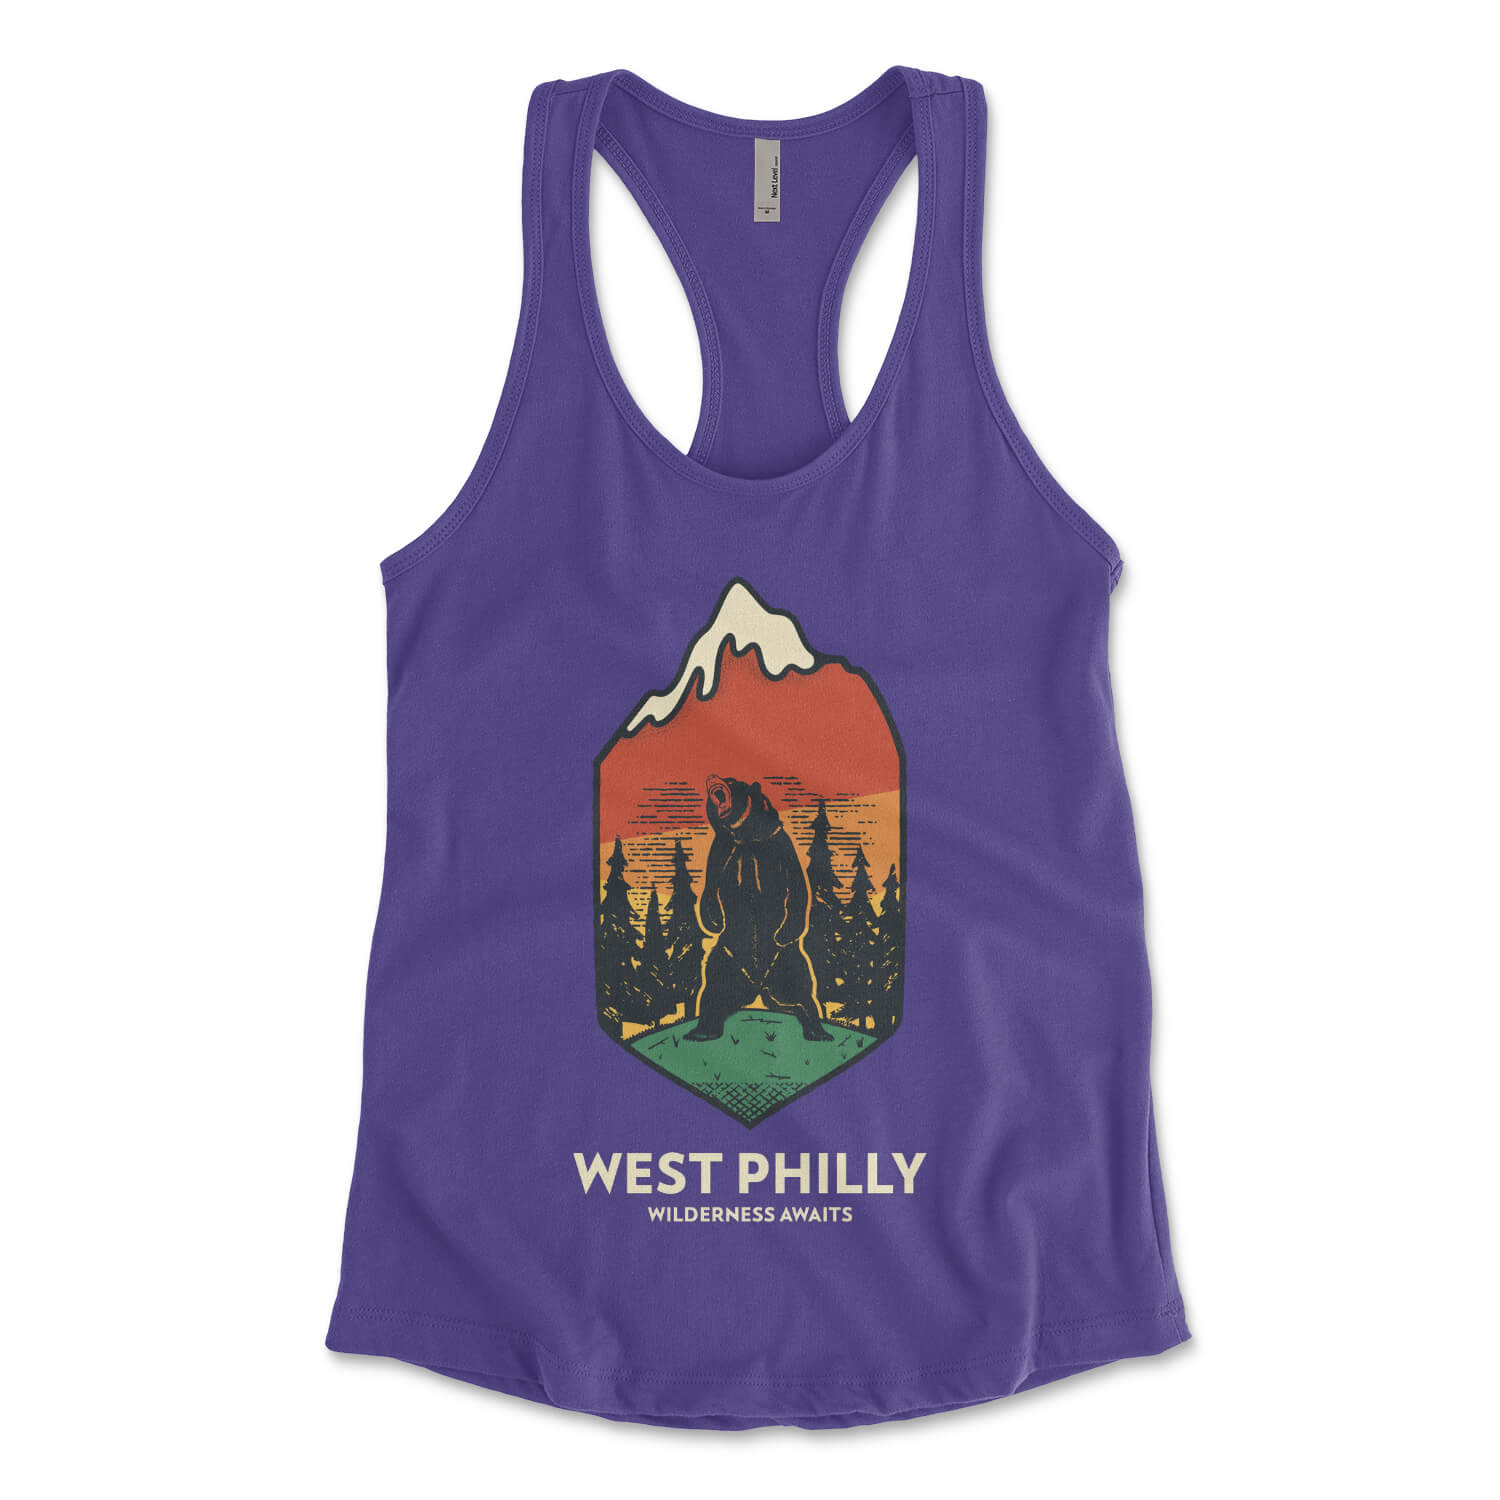 West Philadelphia wilderness awaits bear in the west philly wild on a womens purple racerback tank top from Phillygoat